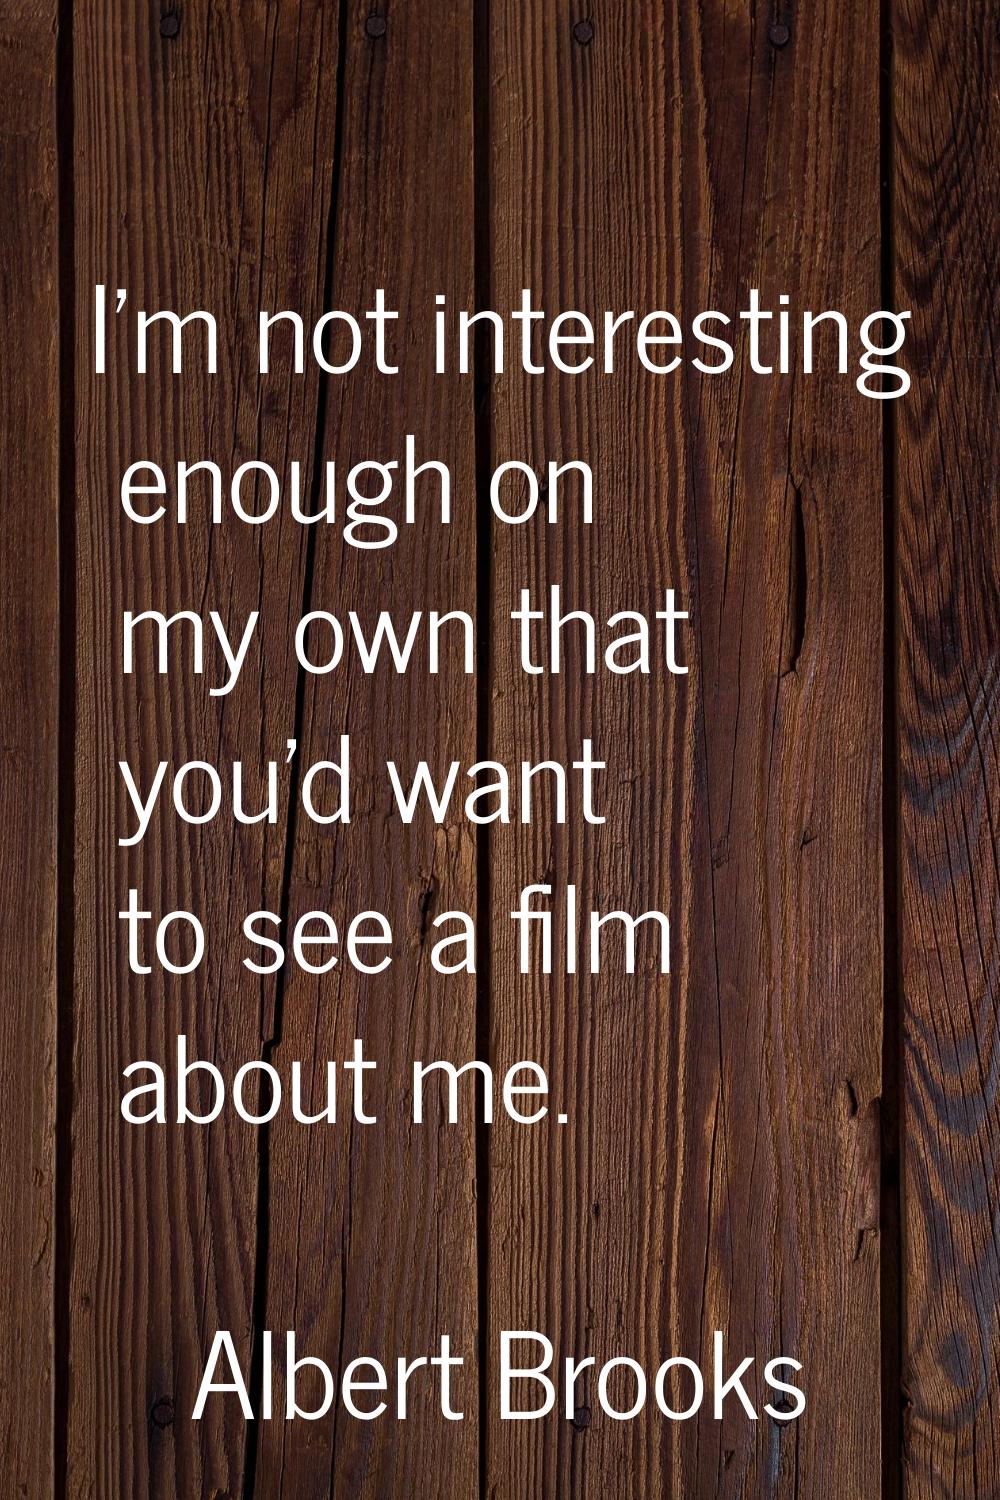 I'm not interesting enough on my own that you'd want to see a film about me.